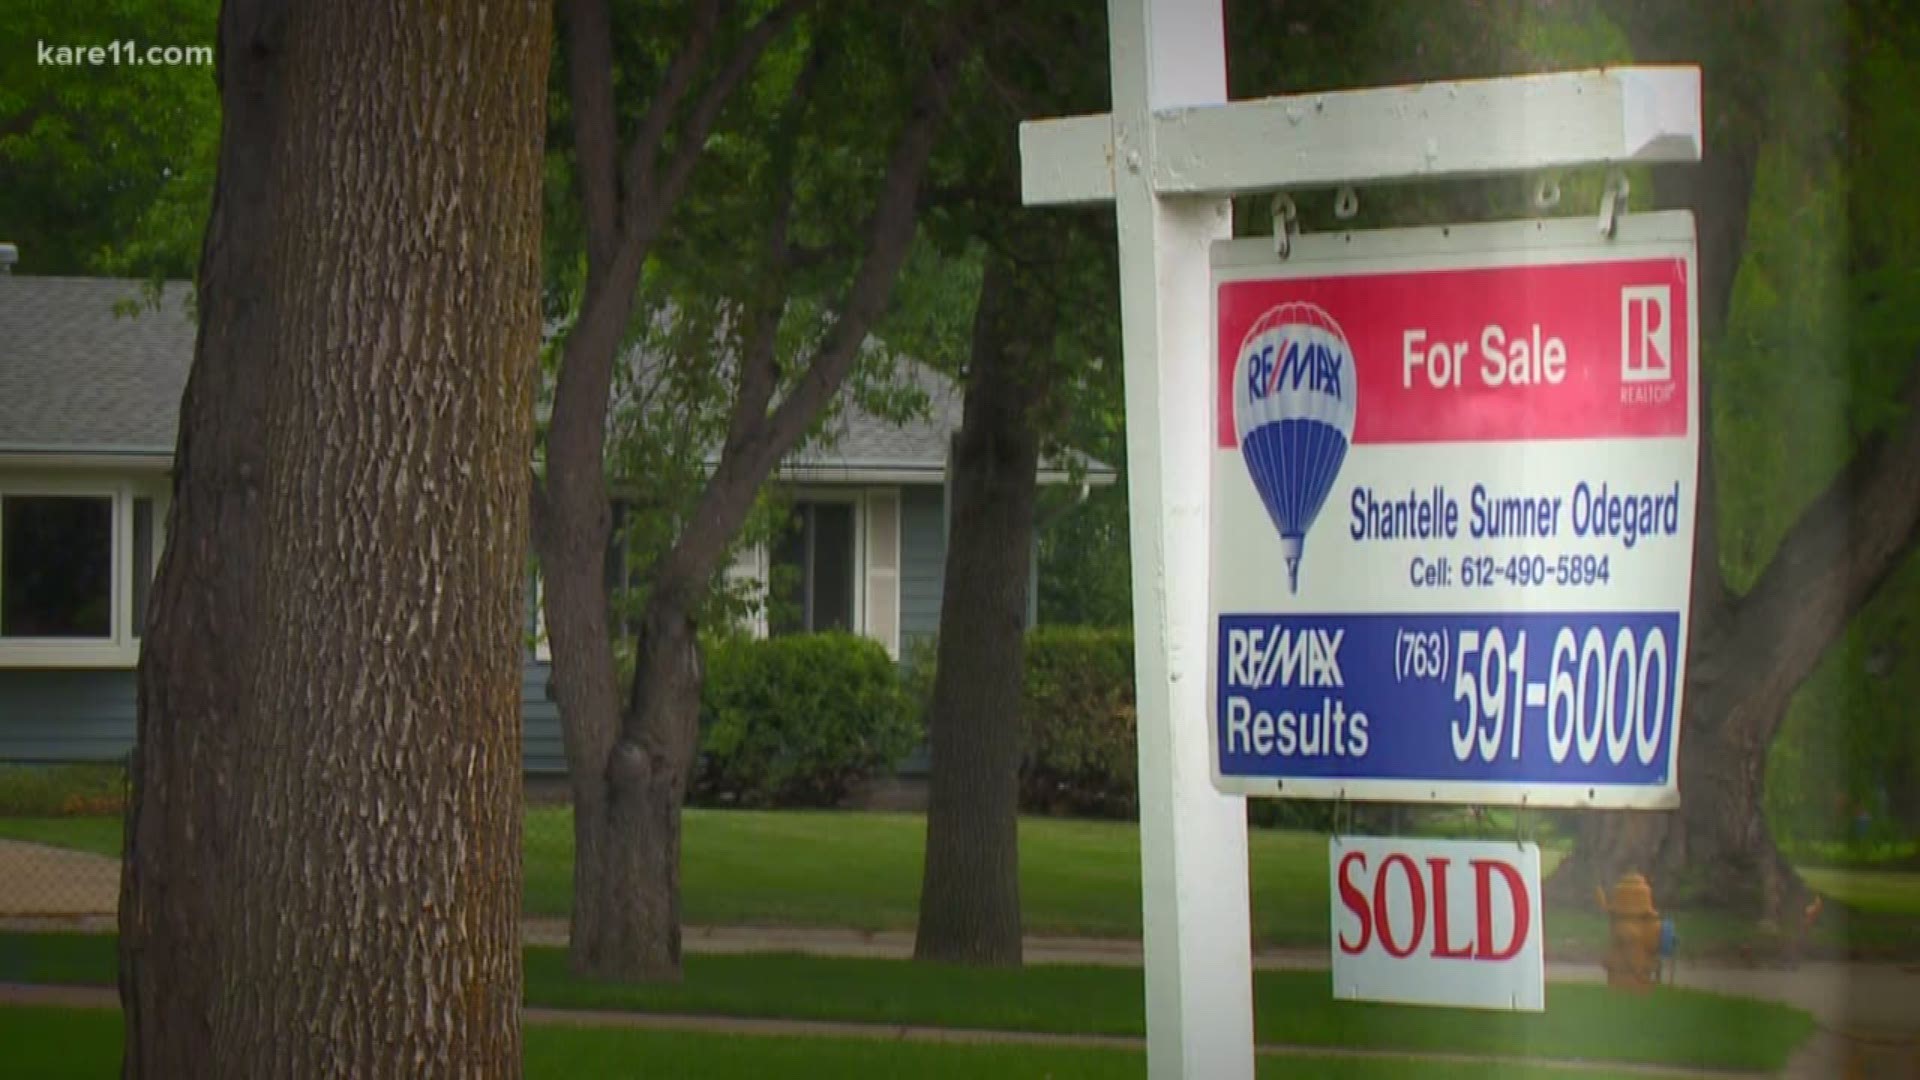 Herb Tousley, director of the real estate program at the University of St. Thomas, says rising home prices are padding pockets for some Twin Cities homeowners. https://kare11.tv/2IzDptg